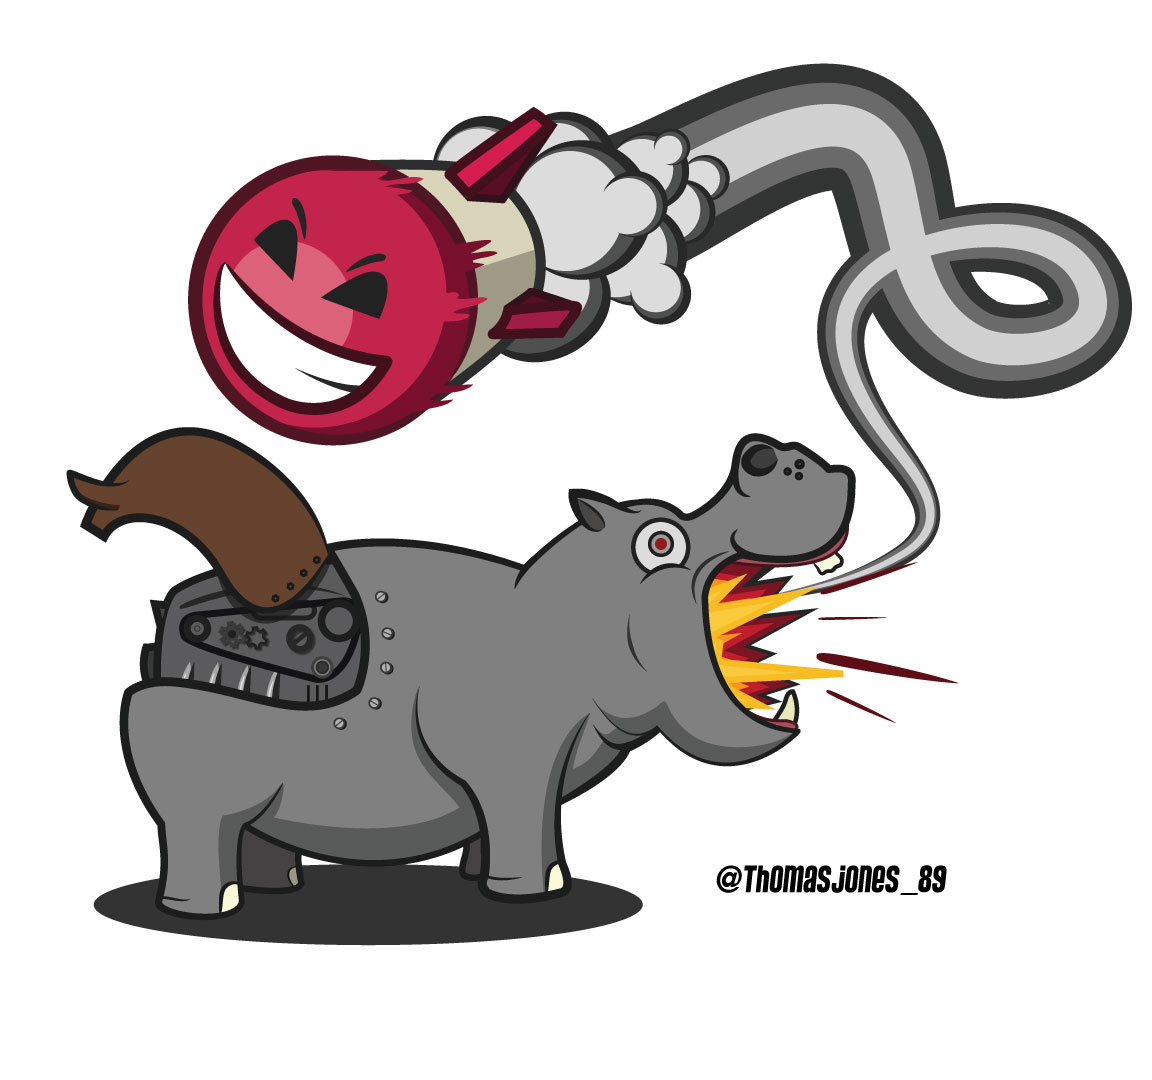 The Hippo Launcher - #Mother3Collab